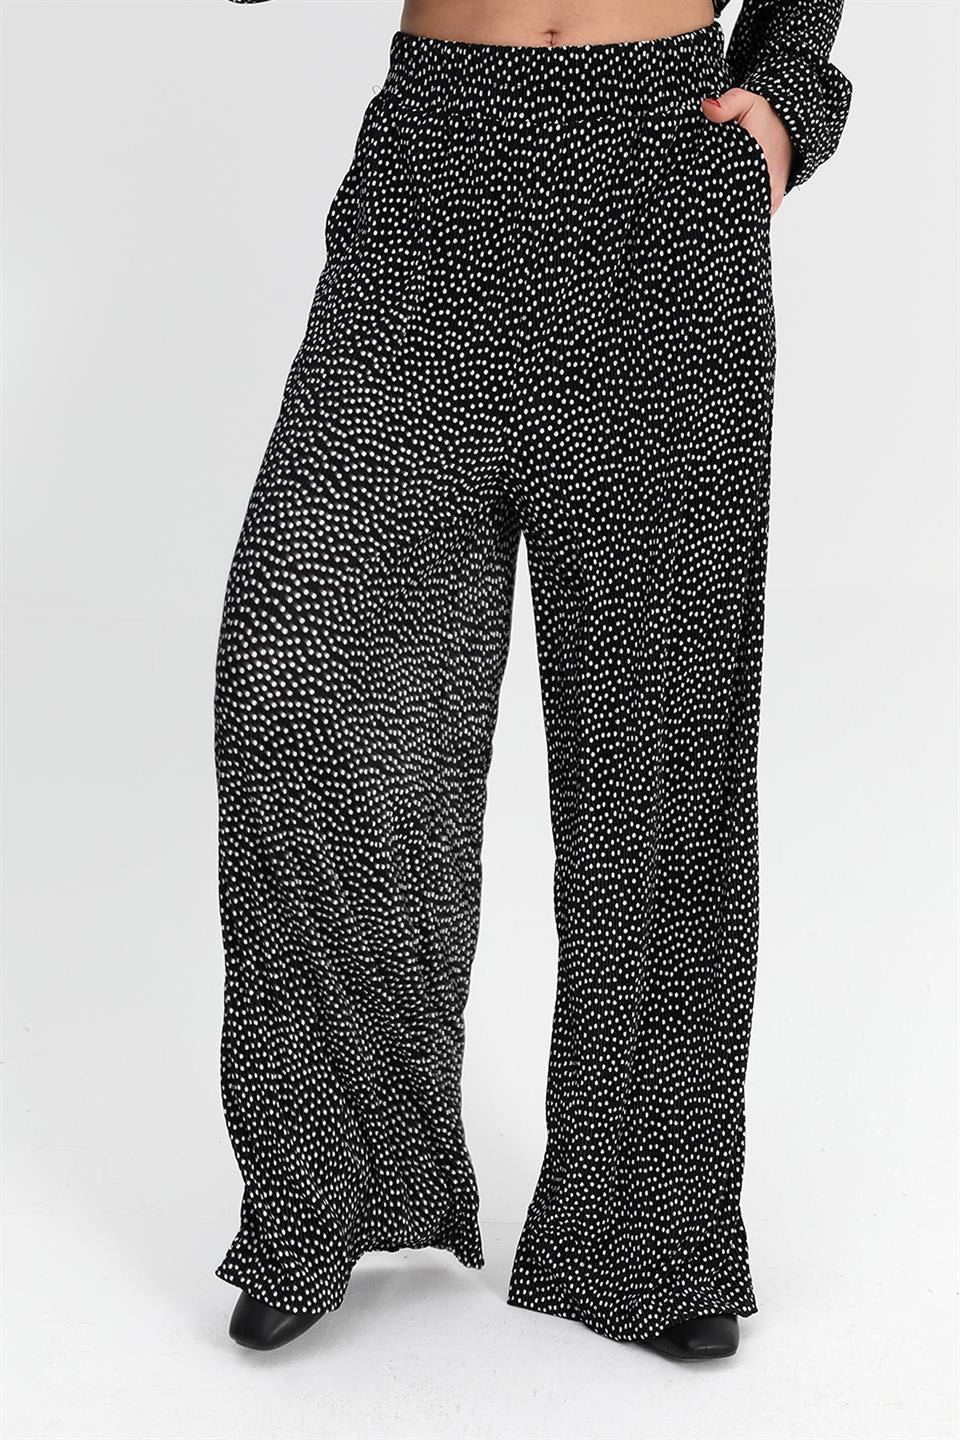 Women's Suit Pleated Knitted Polka Dot Pattern - Black - STREETMODE ™